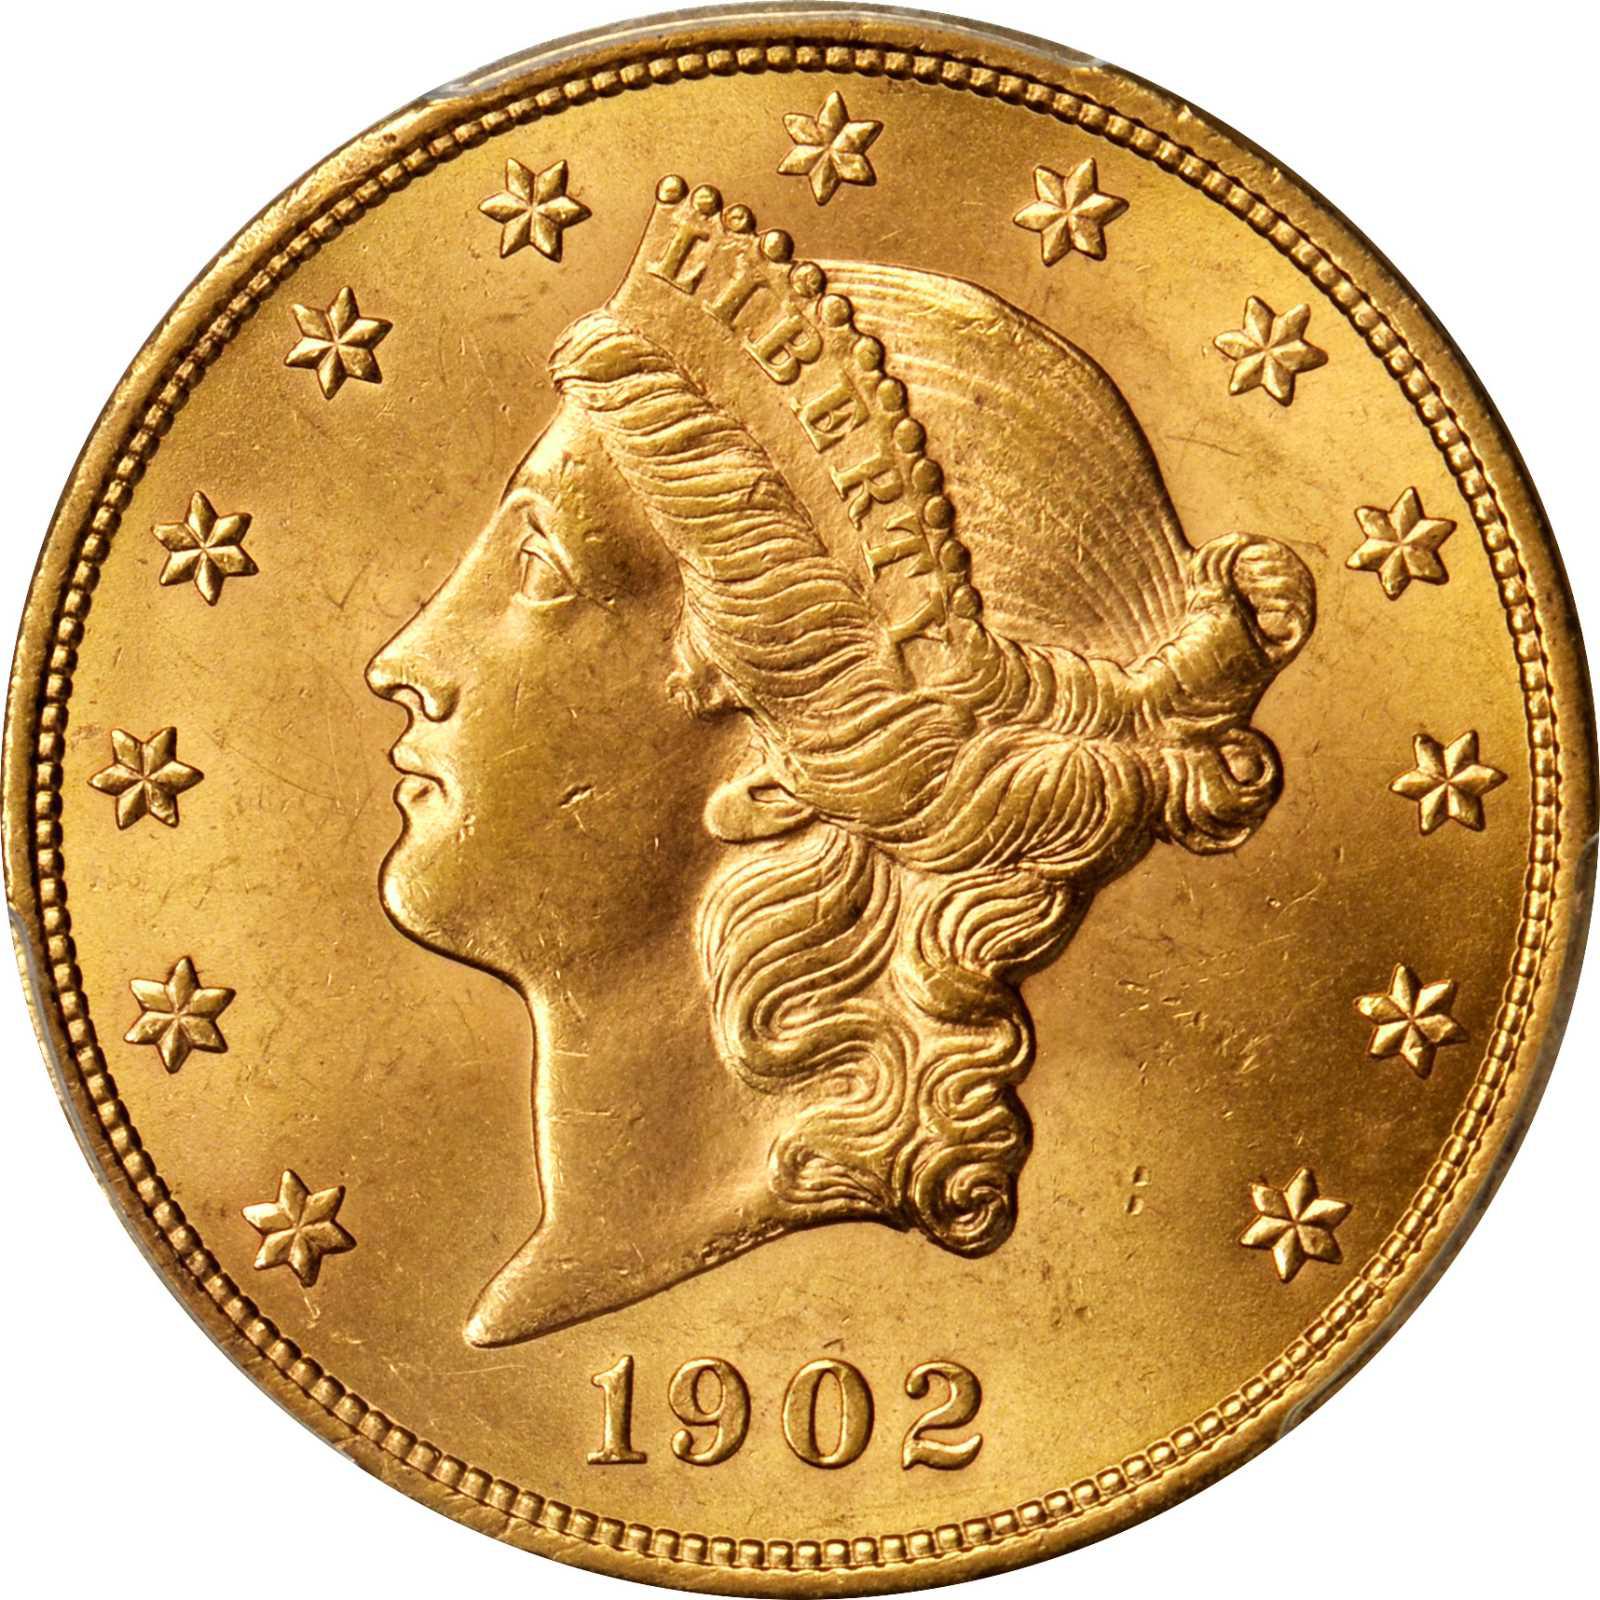 value of 2000 liberty gold dollar coins